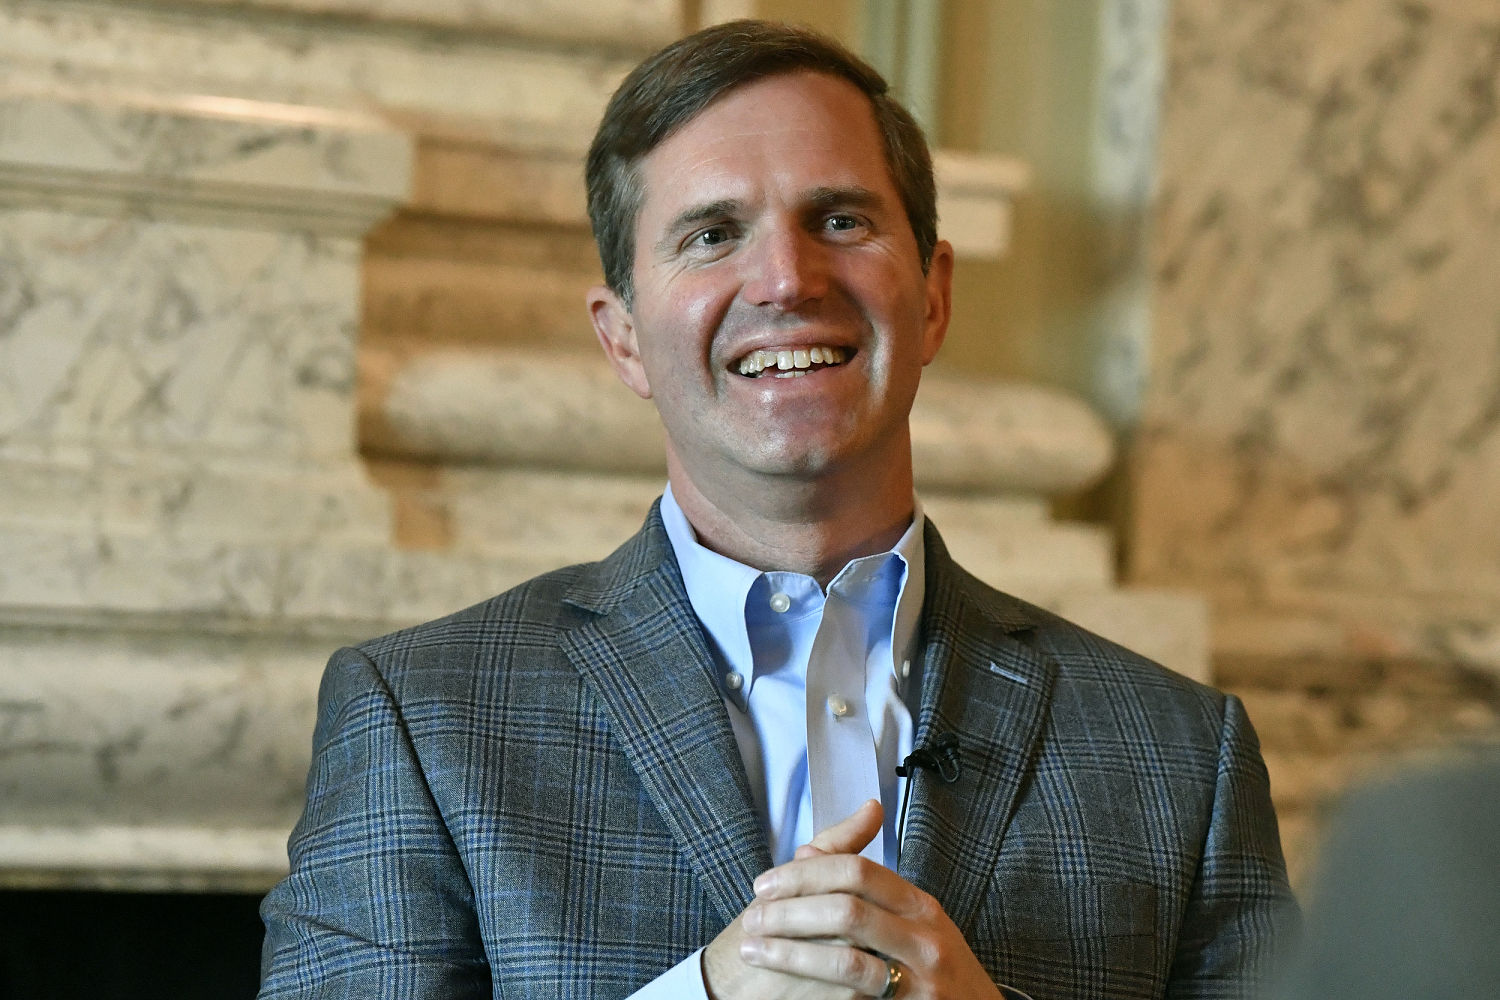 With Kentucky Gov. Andy Beshear, Democrats eye a VP pick who can win over blue-collar voters